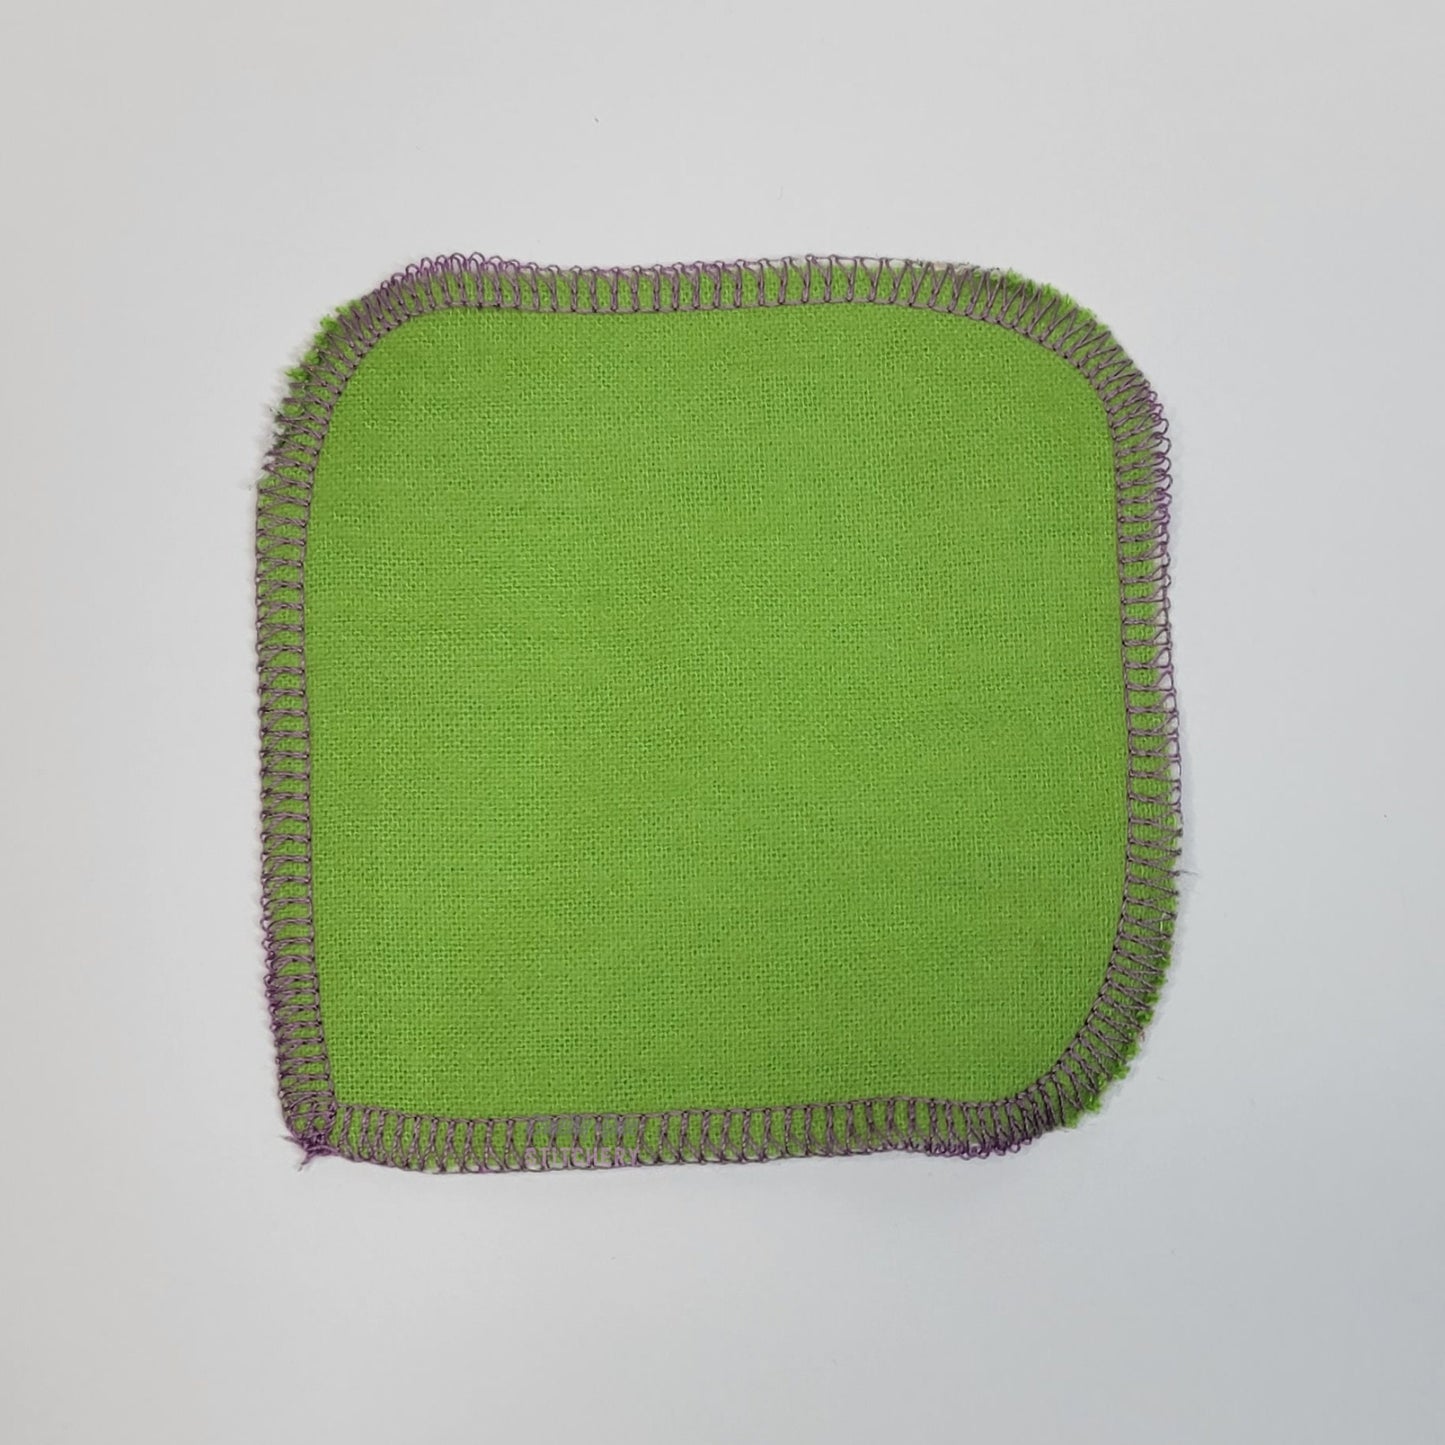 The back of one reusable cotton round, a solid light green.